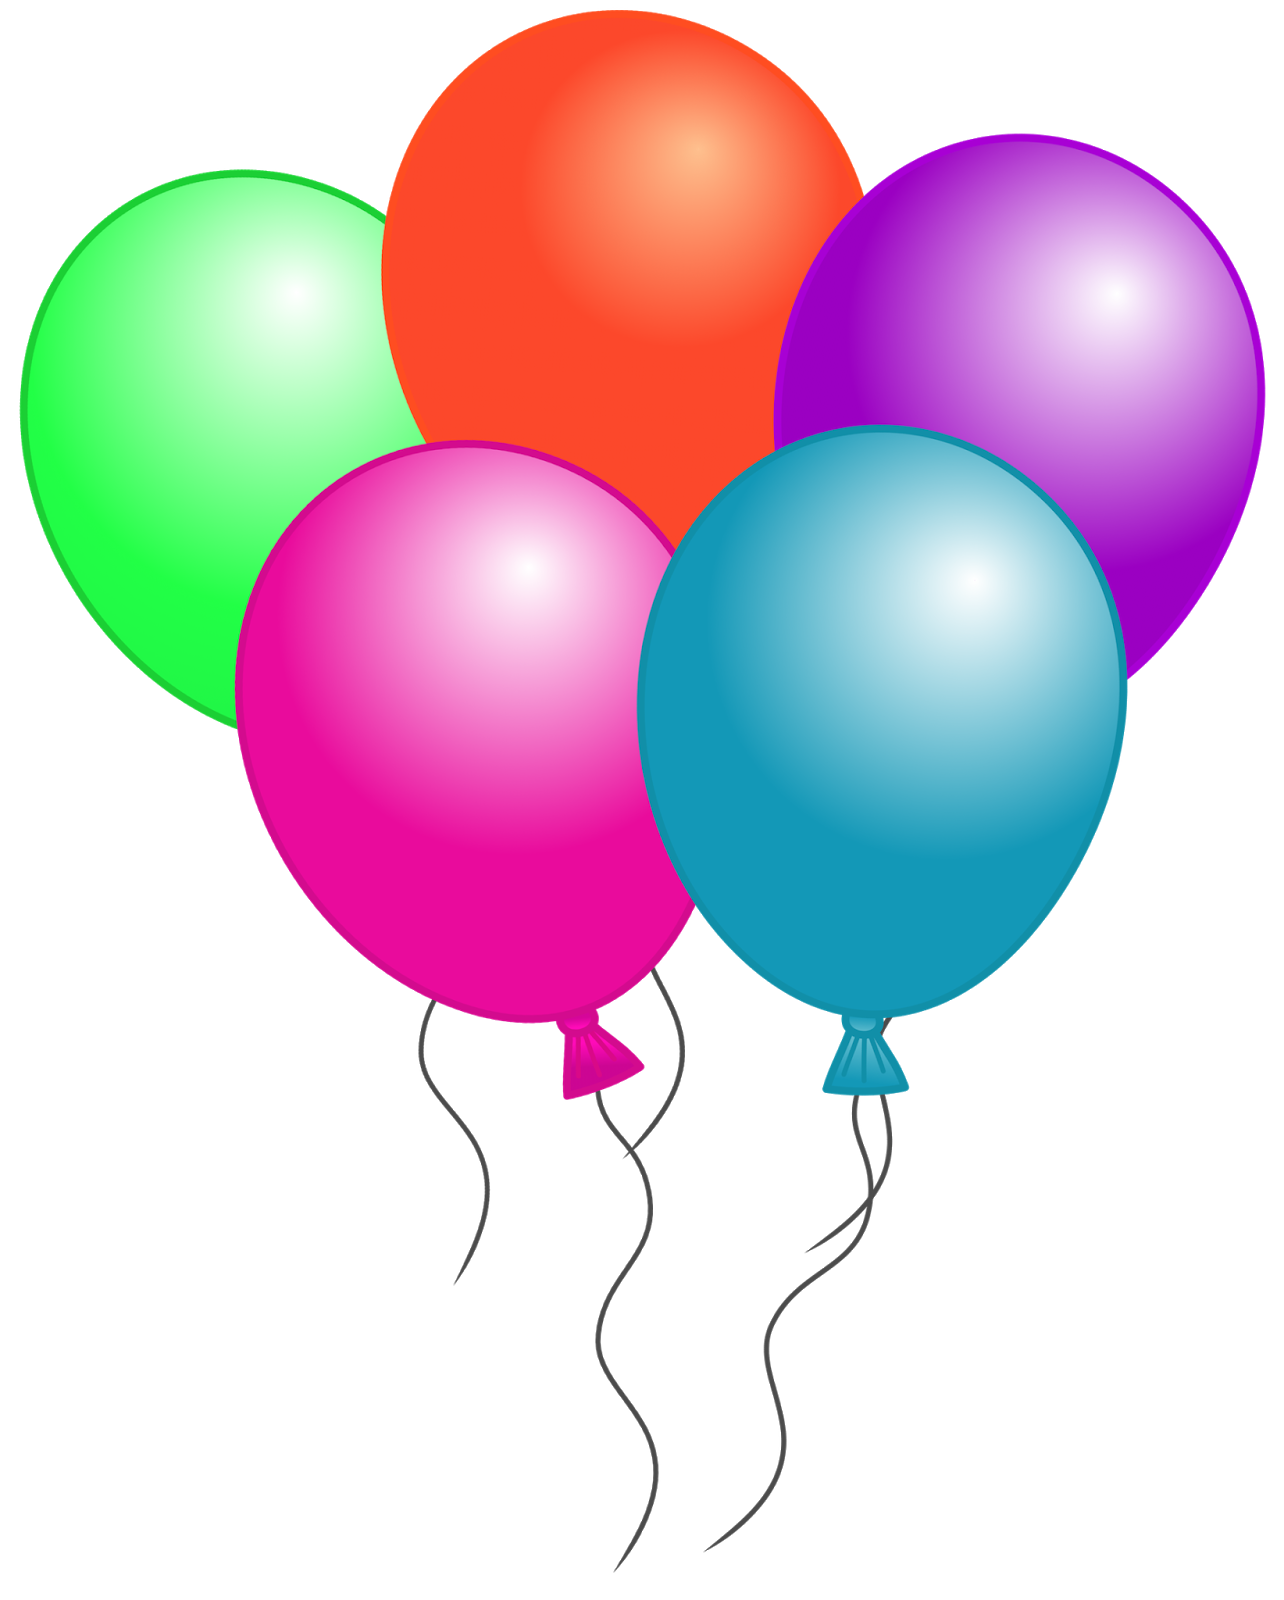 Balloon Pinkpng Clipart - Free Clip Art Images